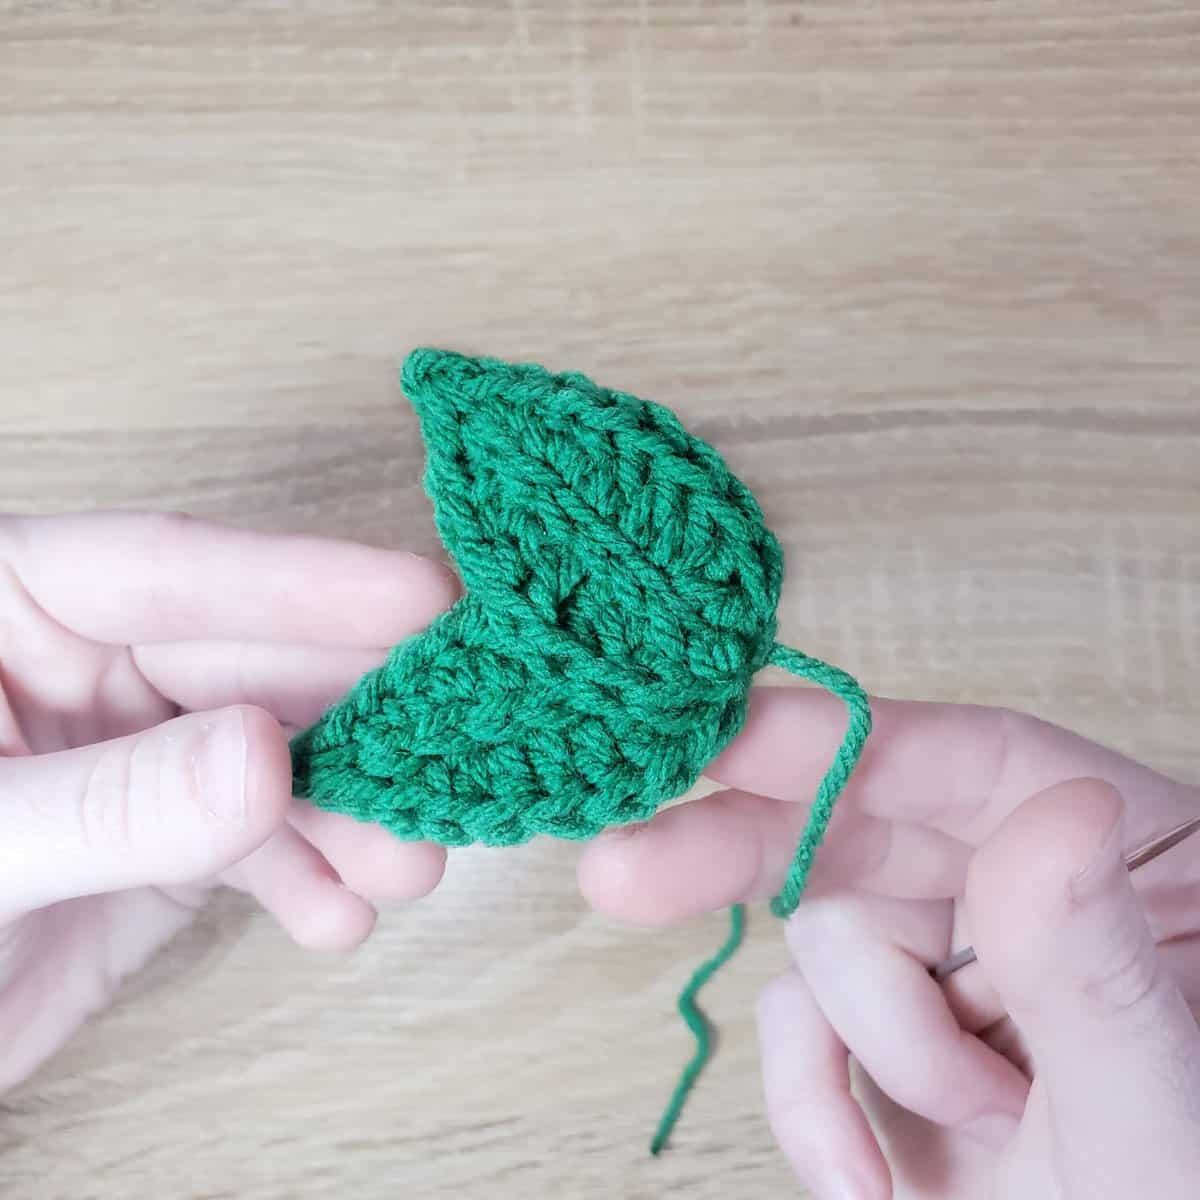 sewing the two leaves together